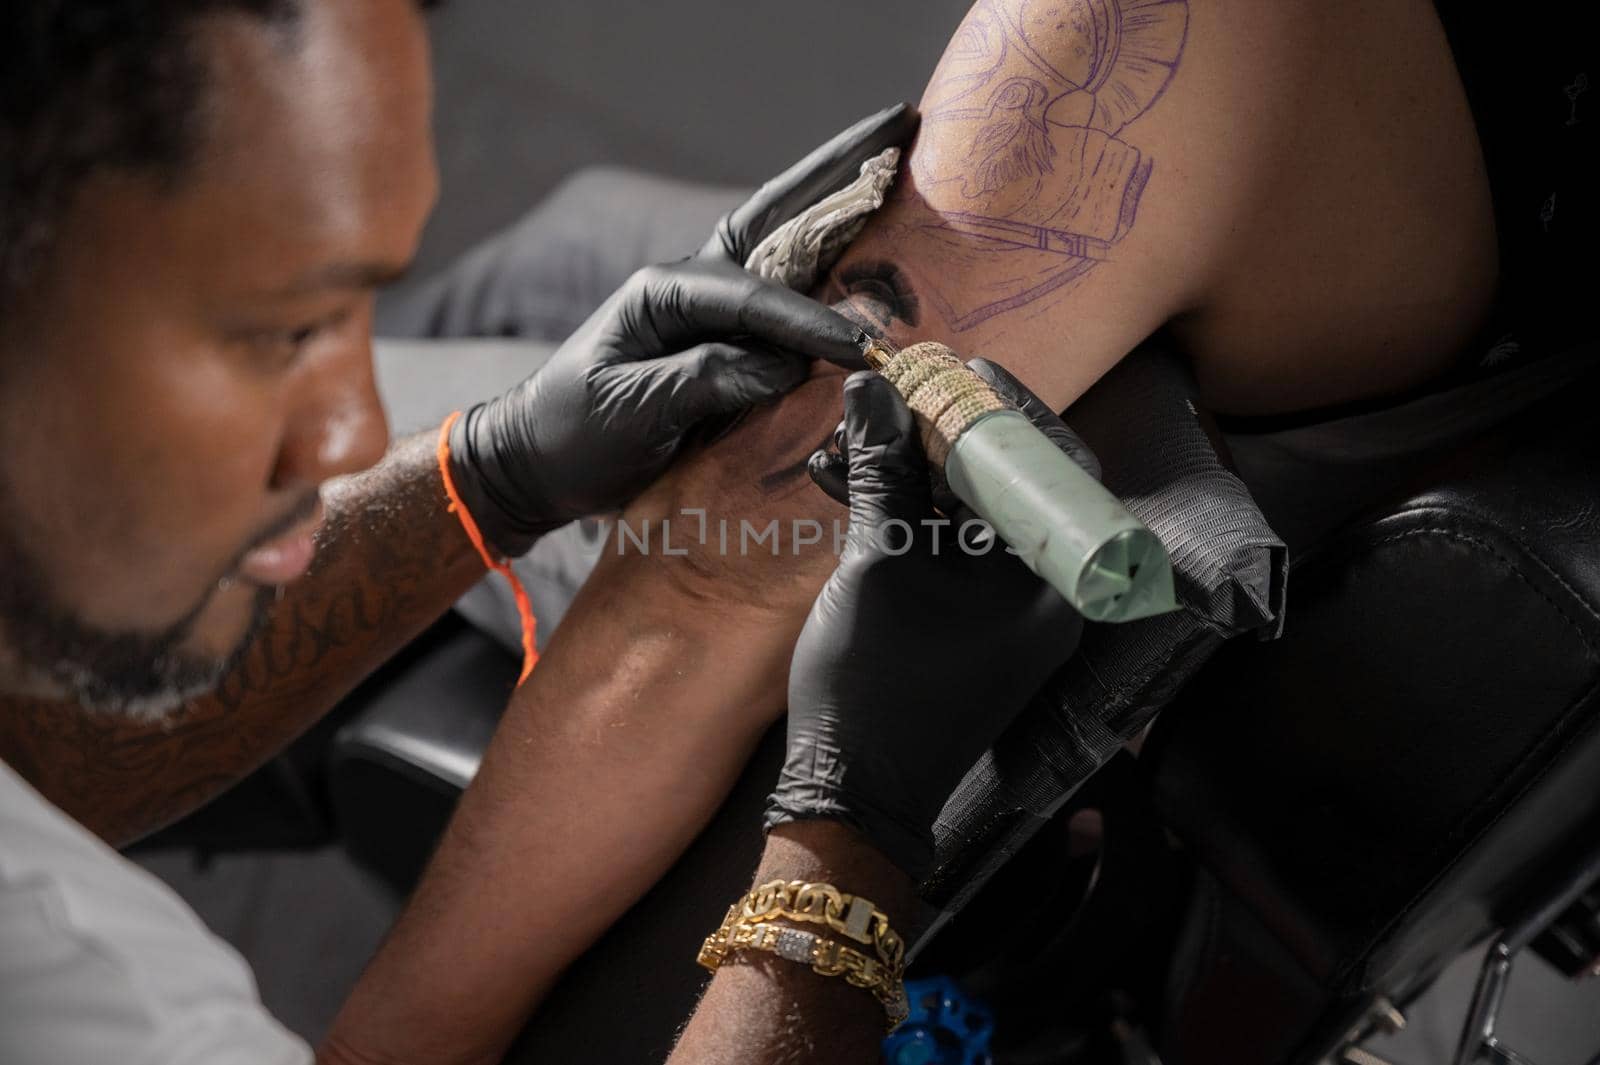 Body art at the tattoo studio. High quality photography